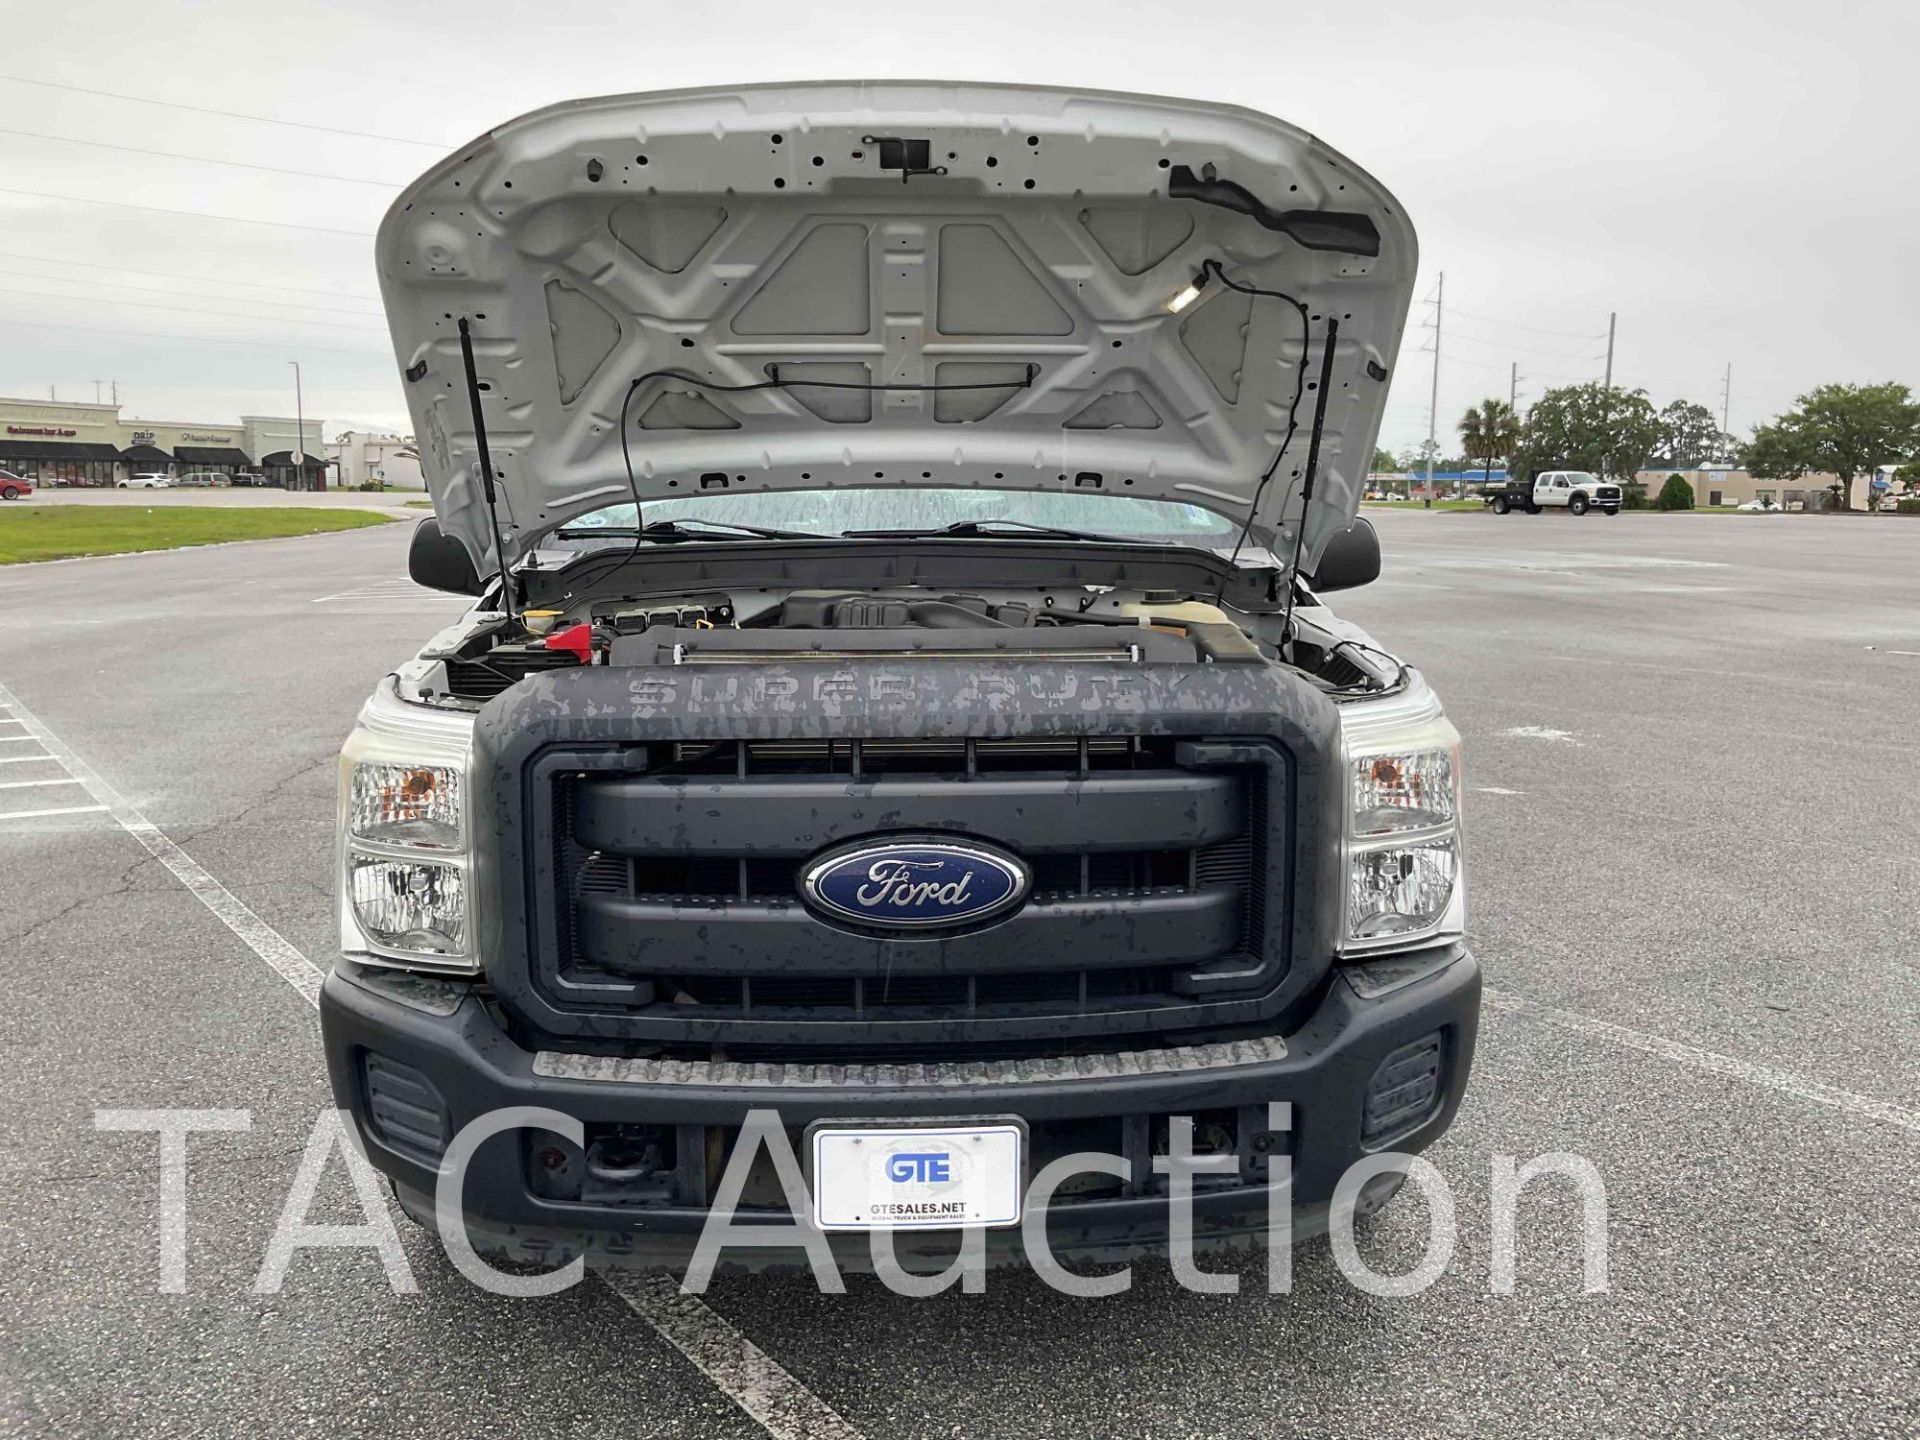 2015 Ford F250 Super Duty Service Truck - Image 37 of 50